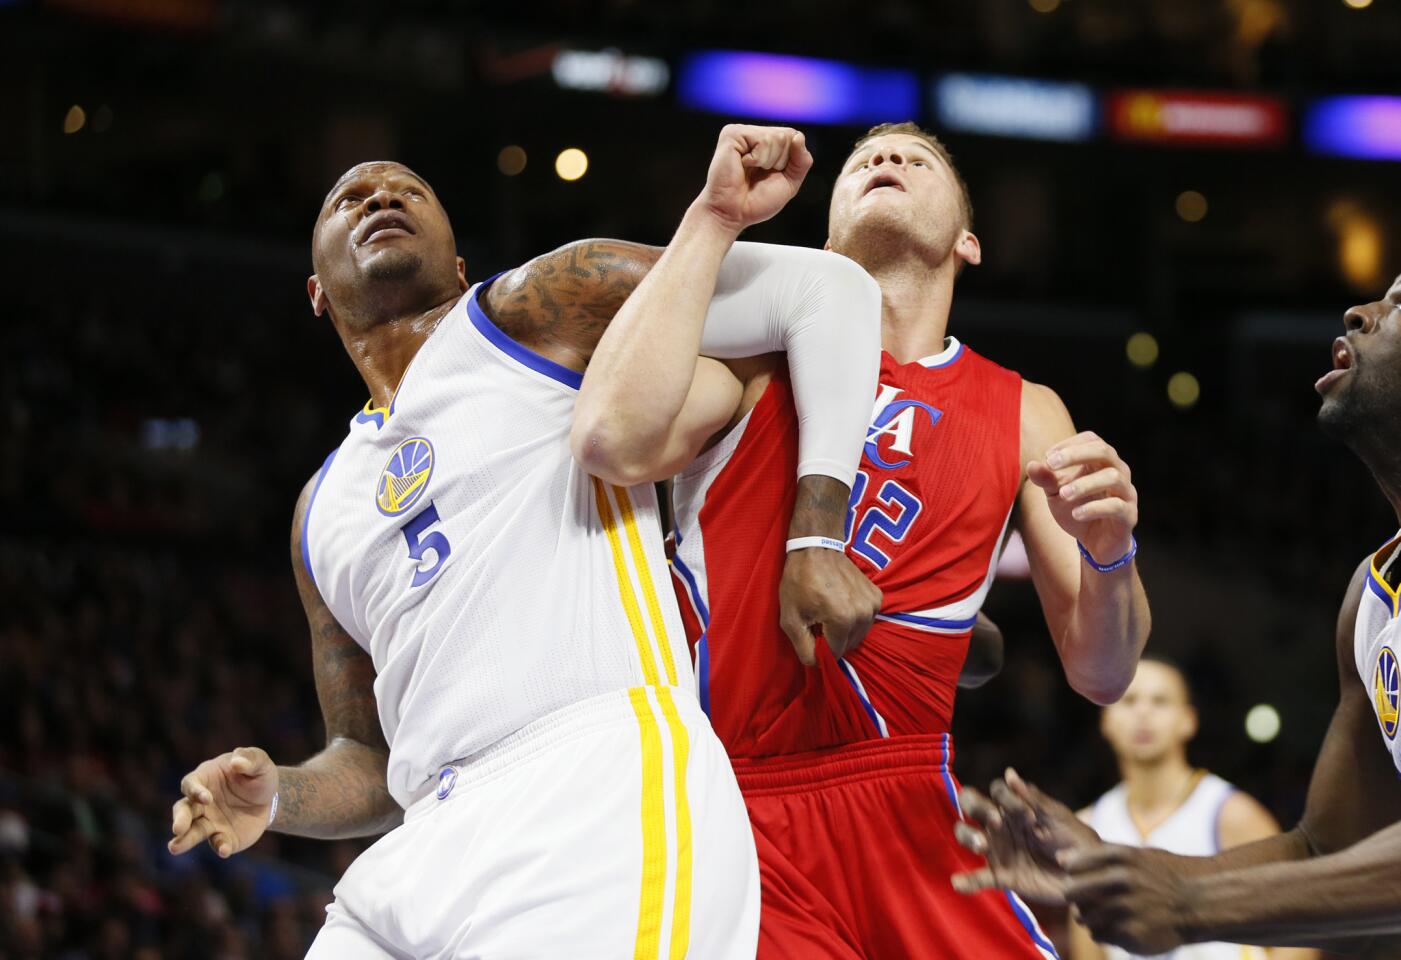 Marreese Speights, Blake Griffin